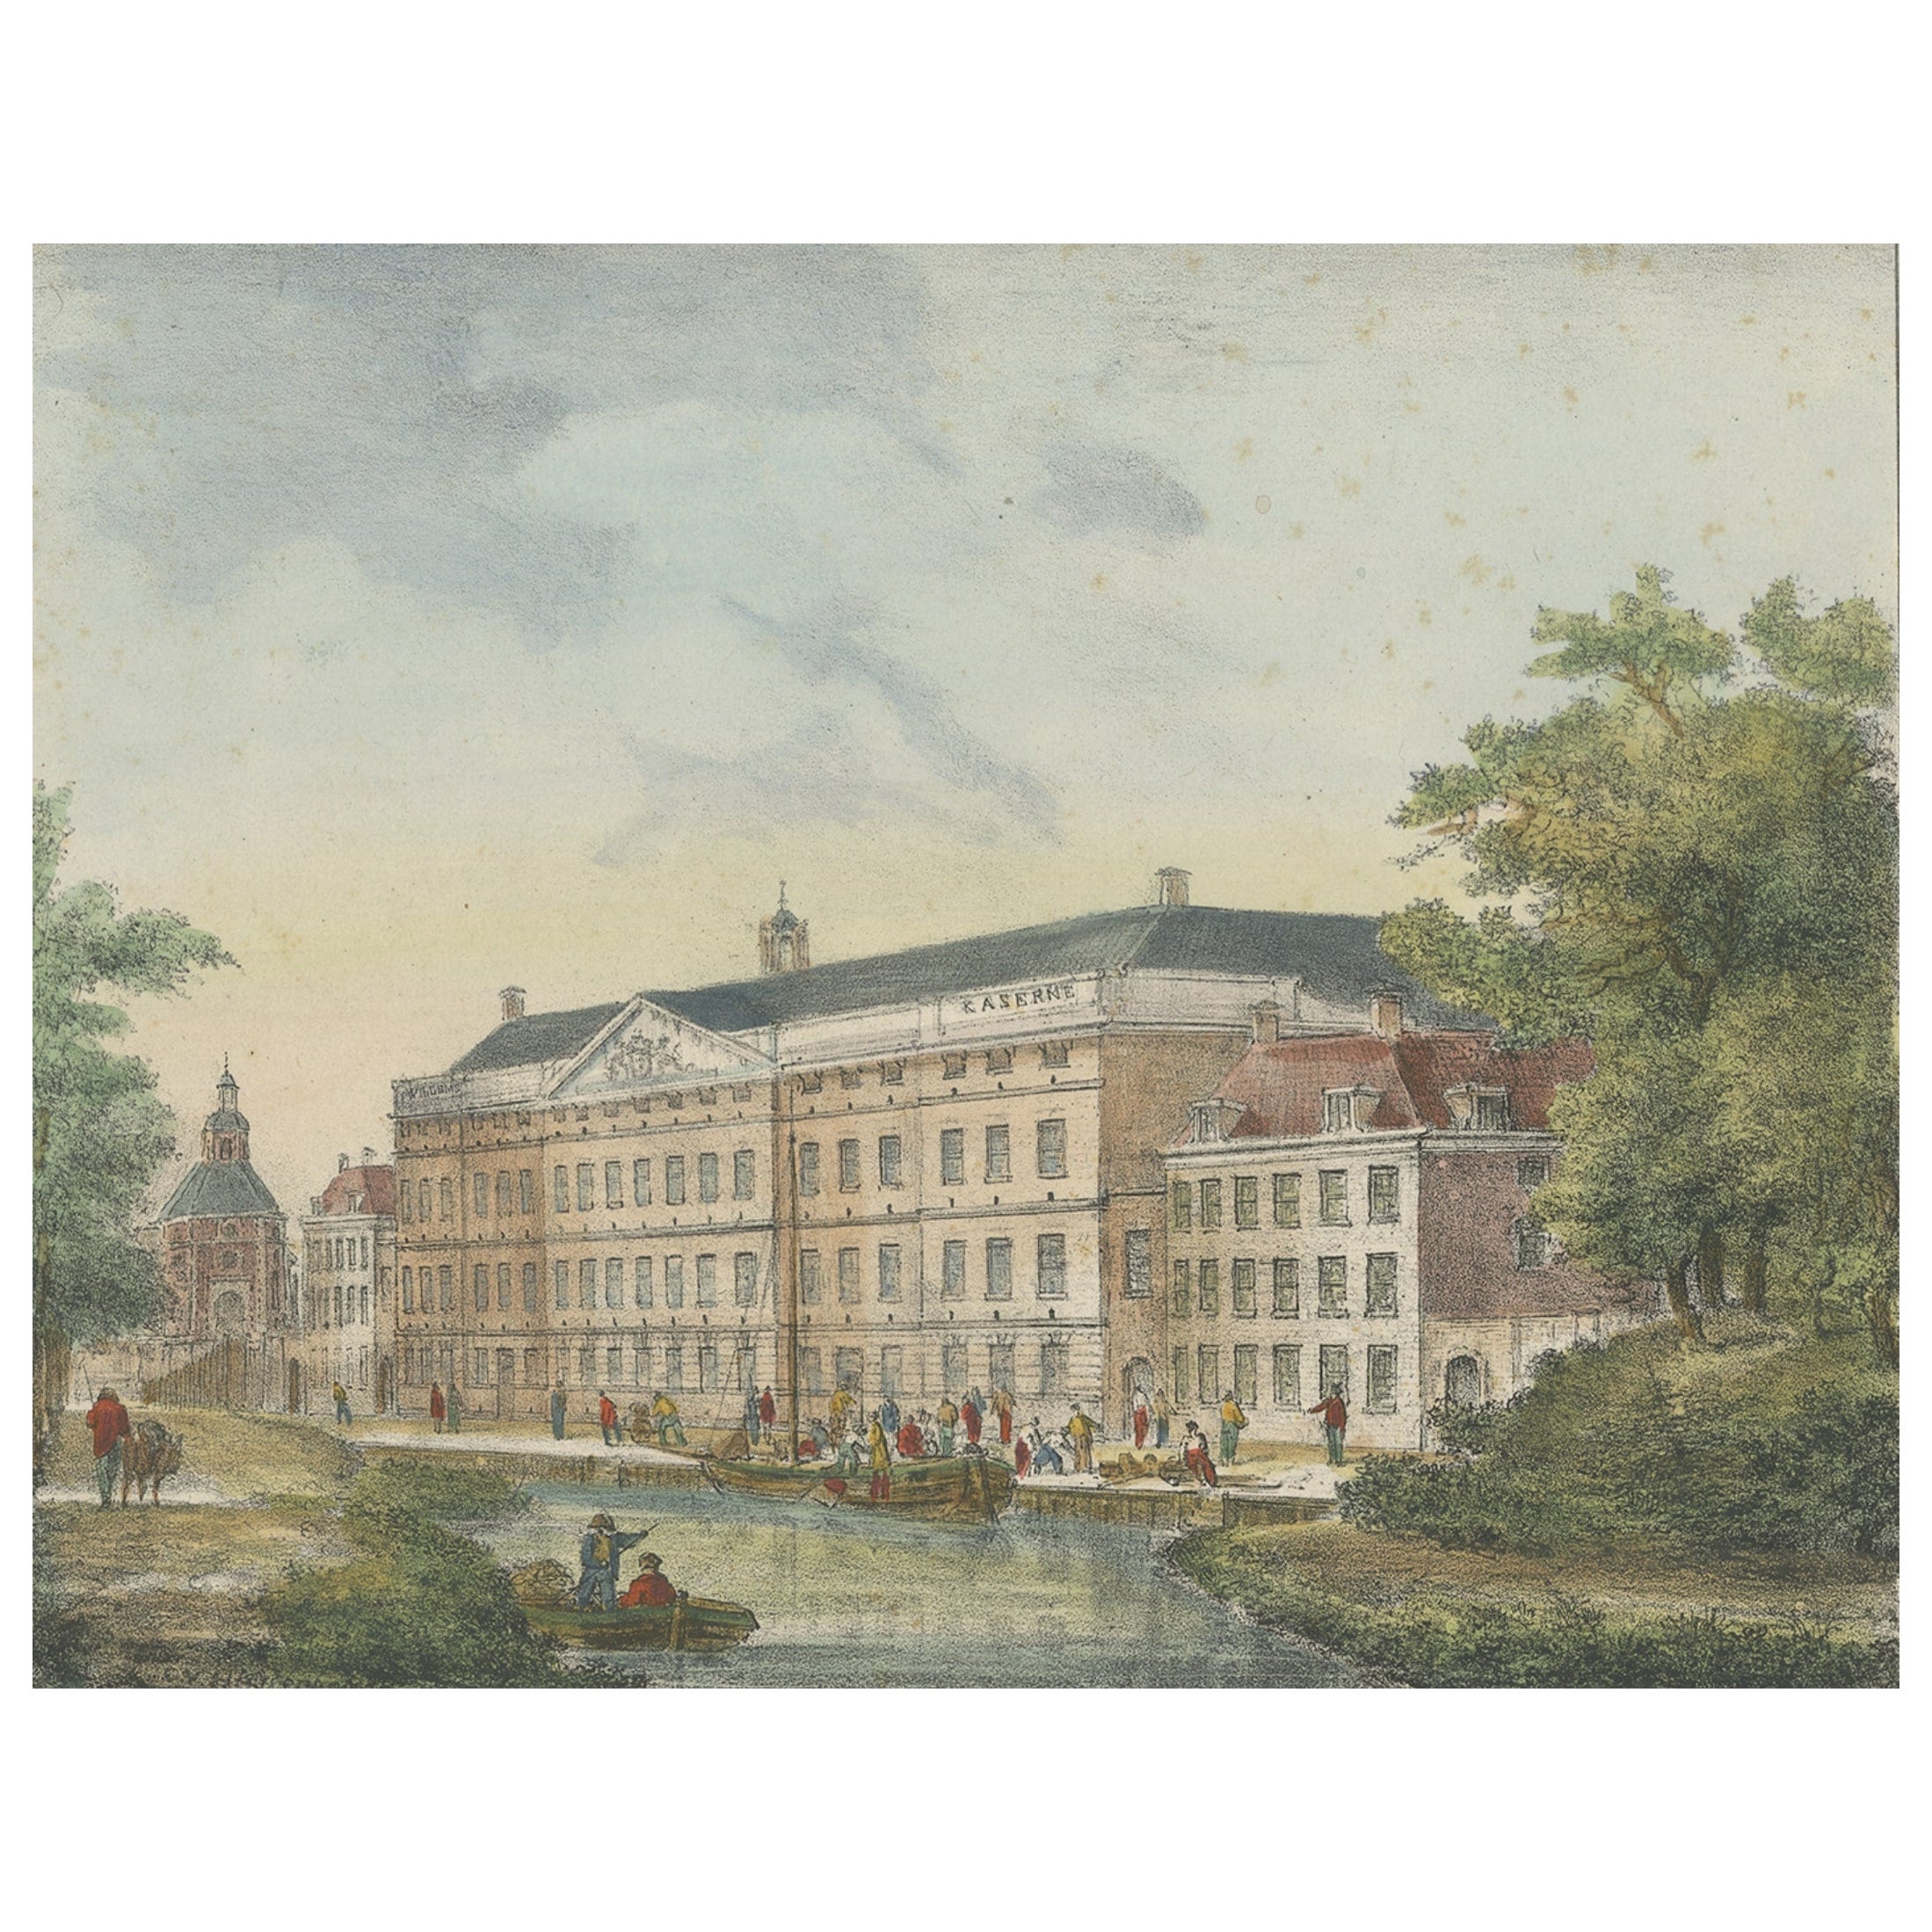 Antique Print of the Militairy Kazerne in Utrecht, The Netherlands, c.1830